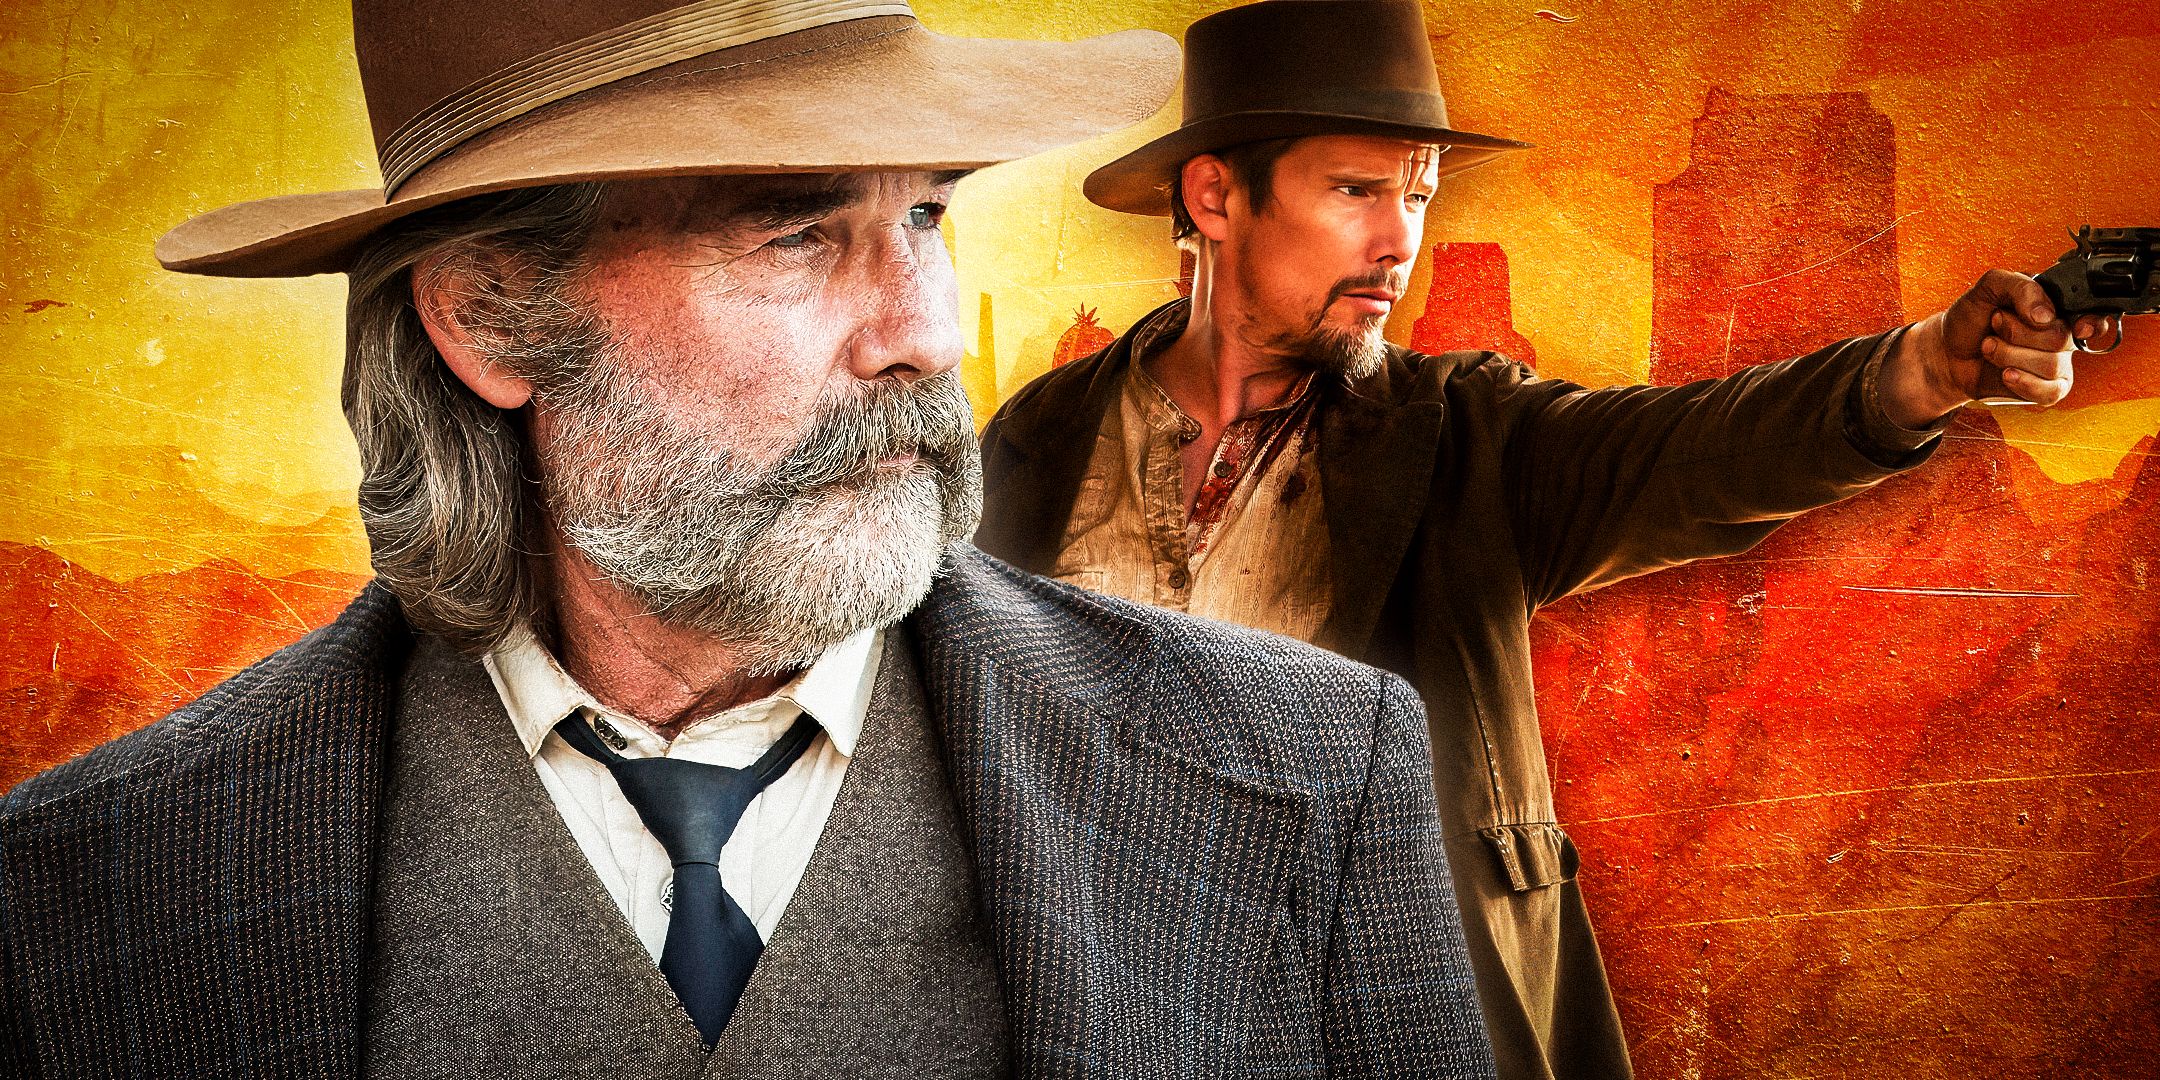 Ethan-Hawke-as-Paul-from-In-a-Valley-of-Violence-&-Kurt-Russell--Sheriff-Hunt-from-Bone-Tomahawk-(2015)